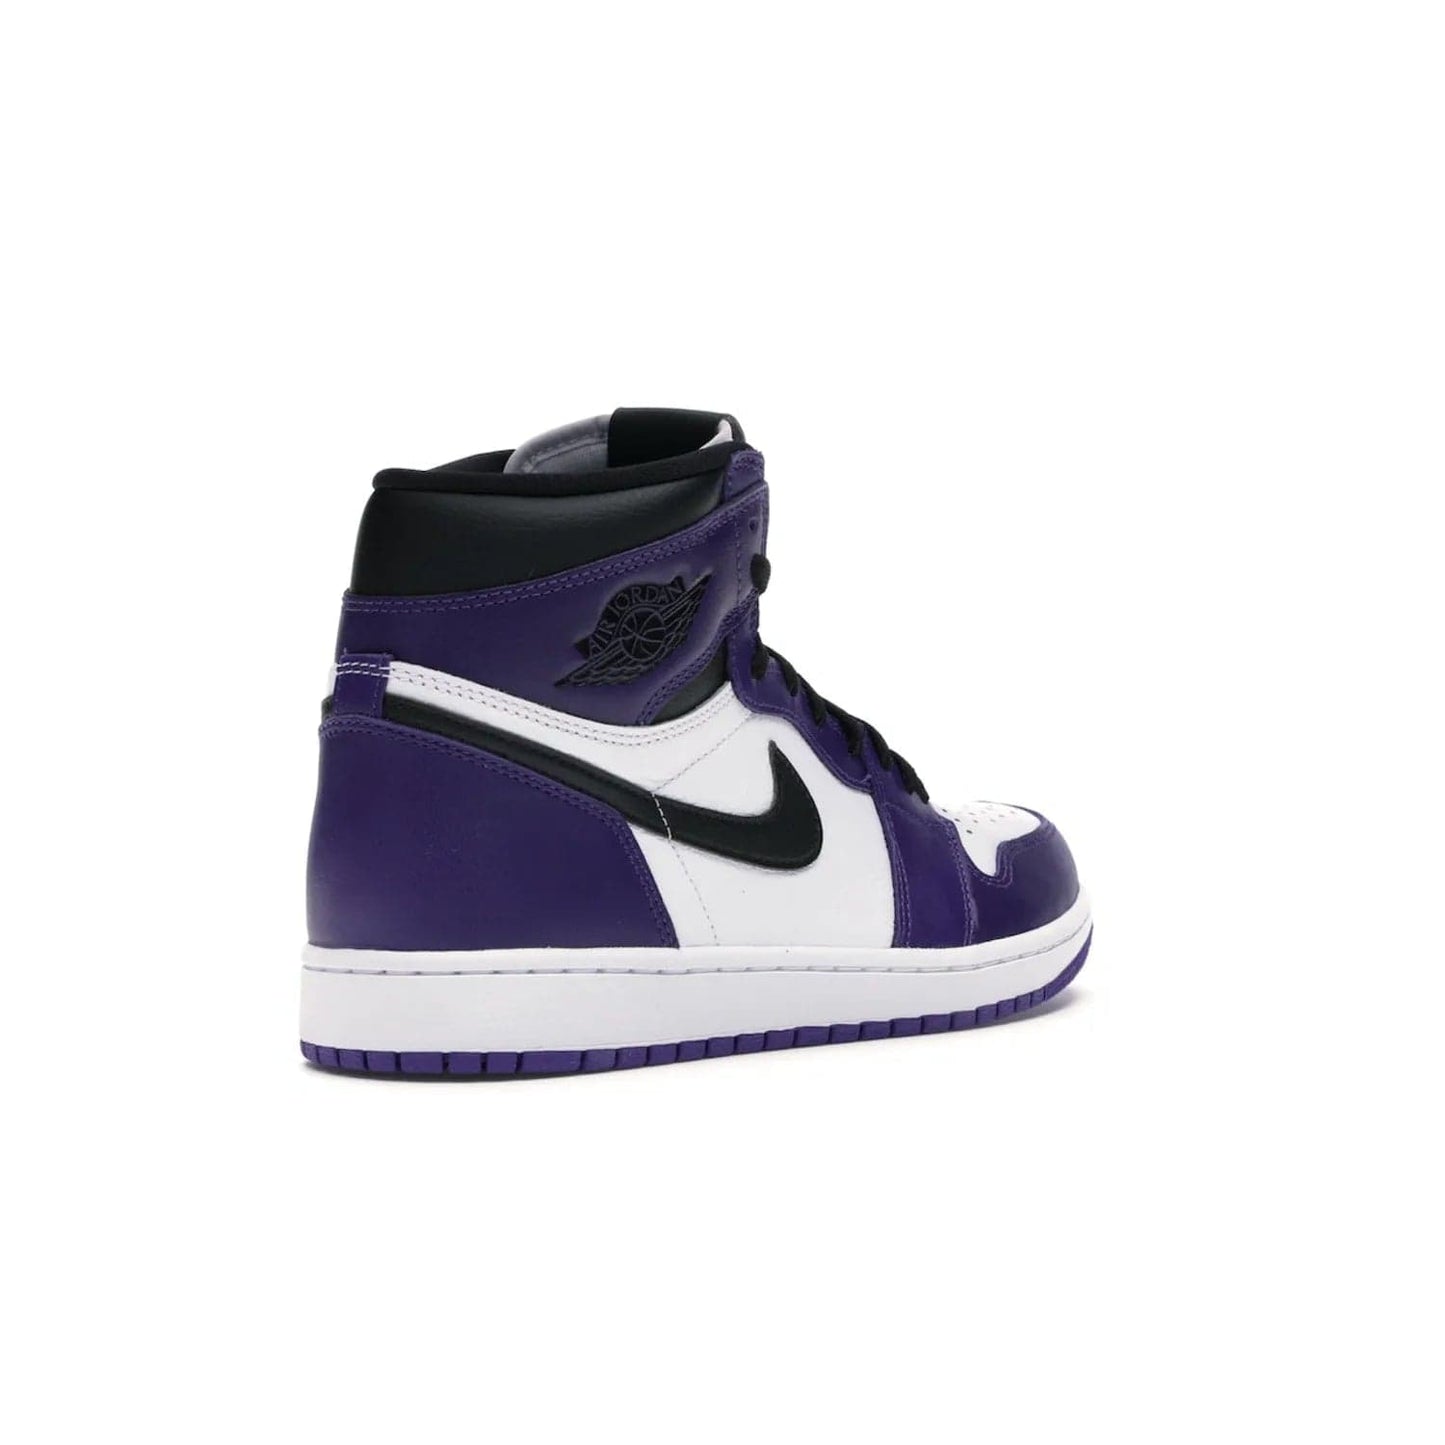 Jordan 1 Retro High Court Purple White - Image 32 - Only at www.BallersClubKickz.com - Grab the classic Jordan 1 Retro High Court Purple White and add major flavor to your collection. White leather upper with Court Purple overlays and Swoosh logo. White midsole and purple outsole. Get yours and rep your Jordan Brand.